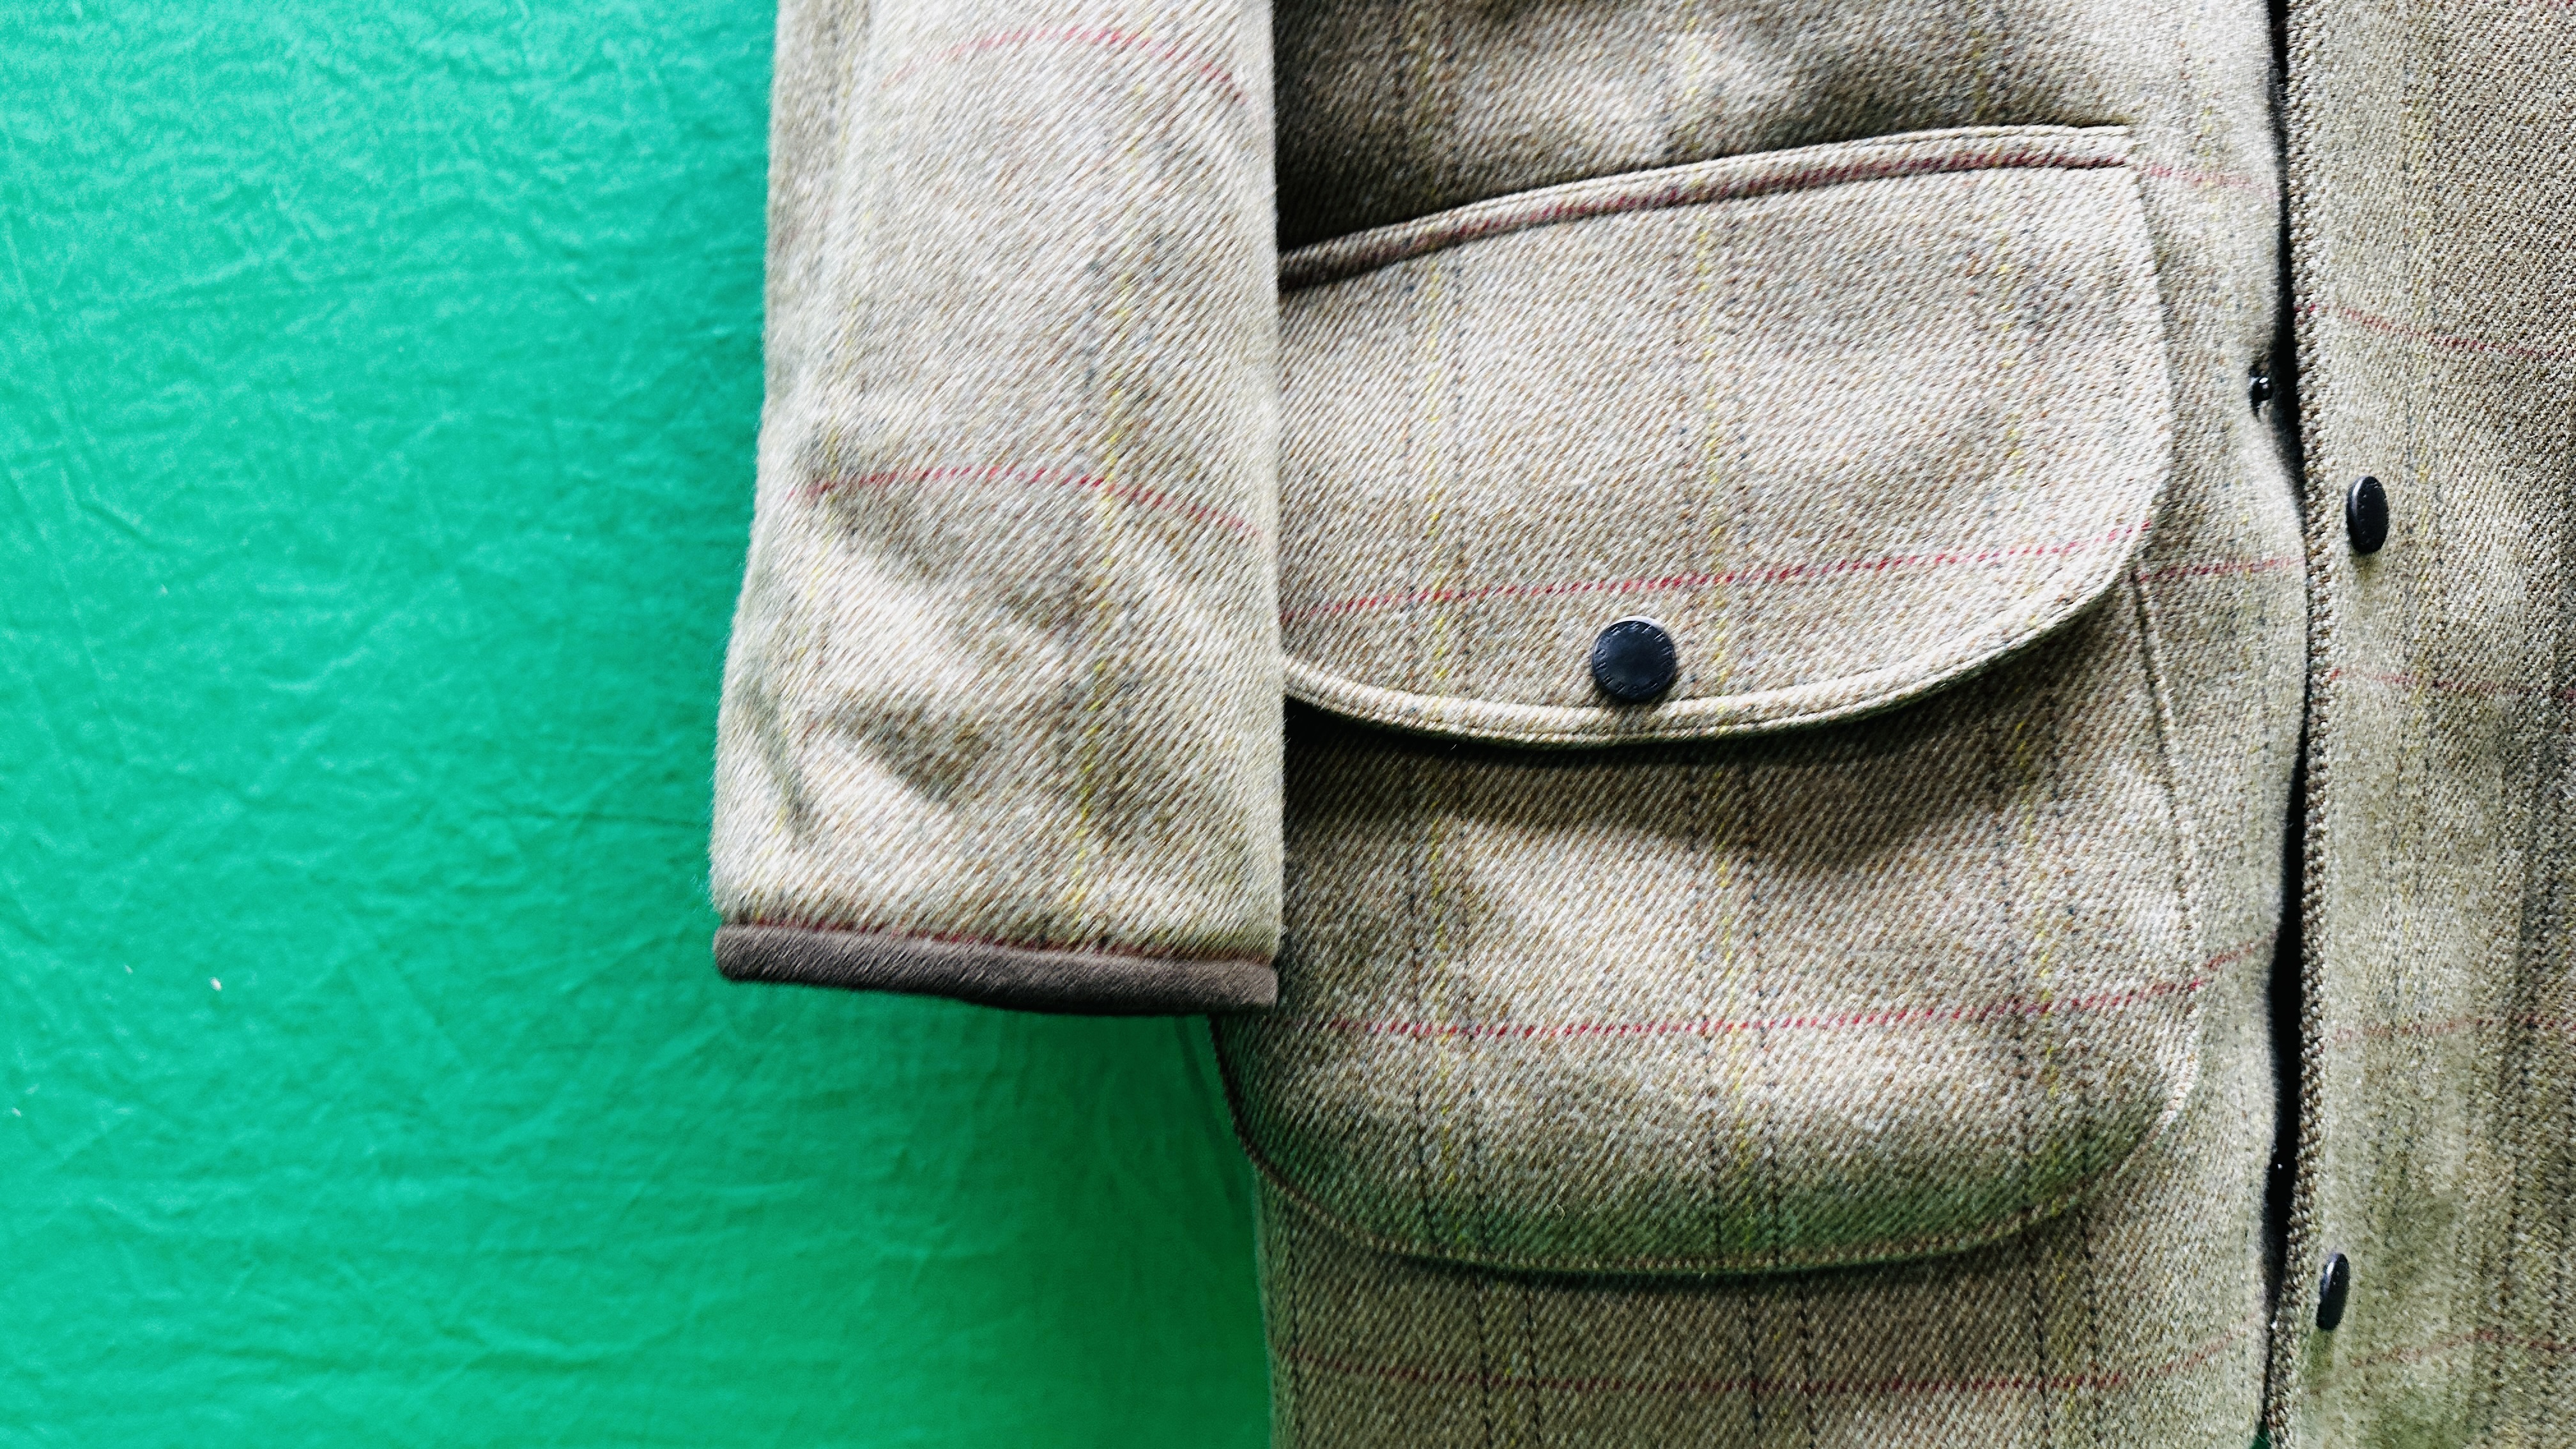 BARBOUR DOUBLE TWIST 100% MERINO 2 PLY TWEED COUNTRY COAT, STYLE T19, - Image 8 of 11